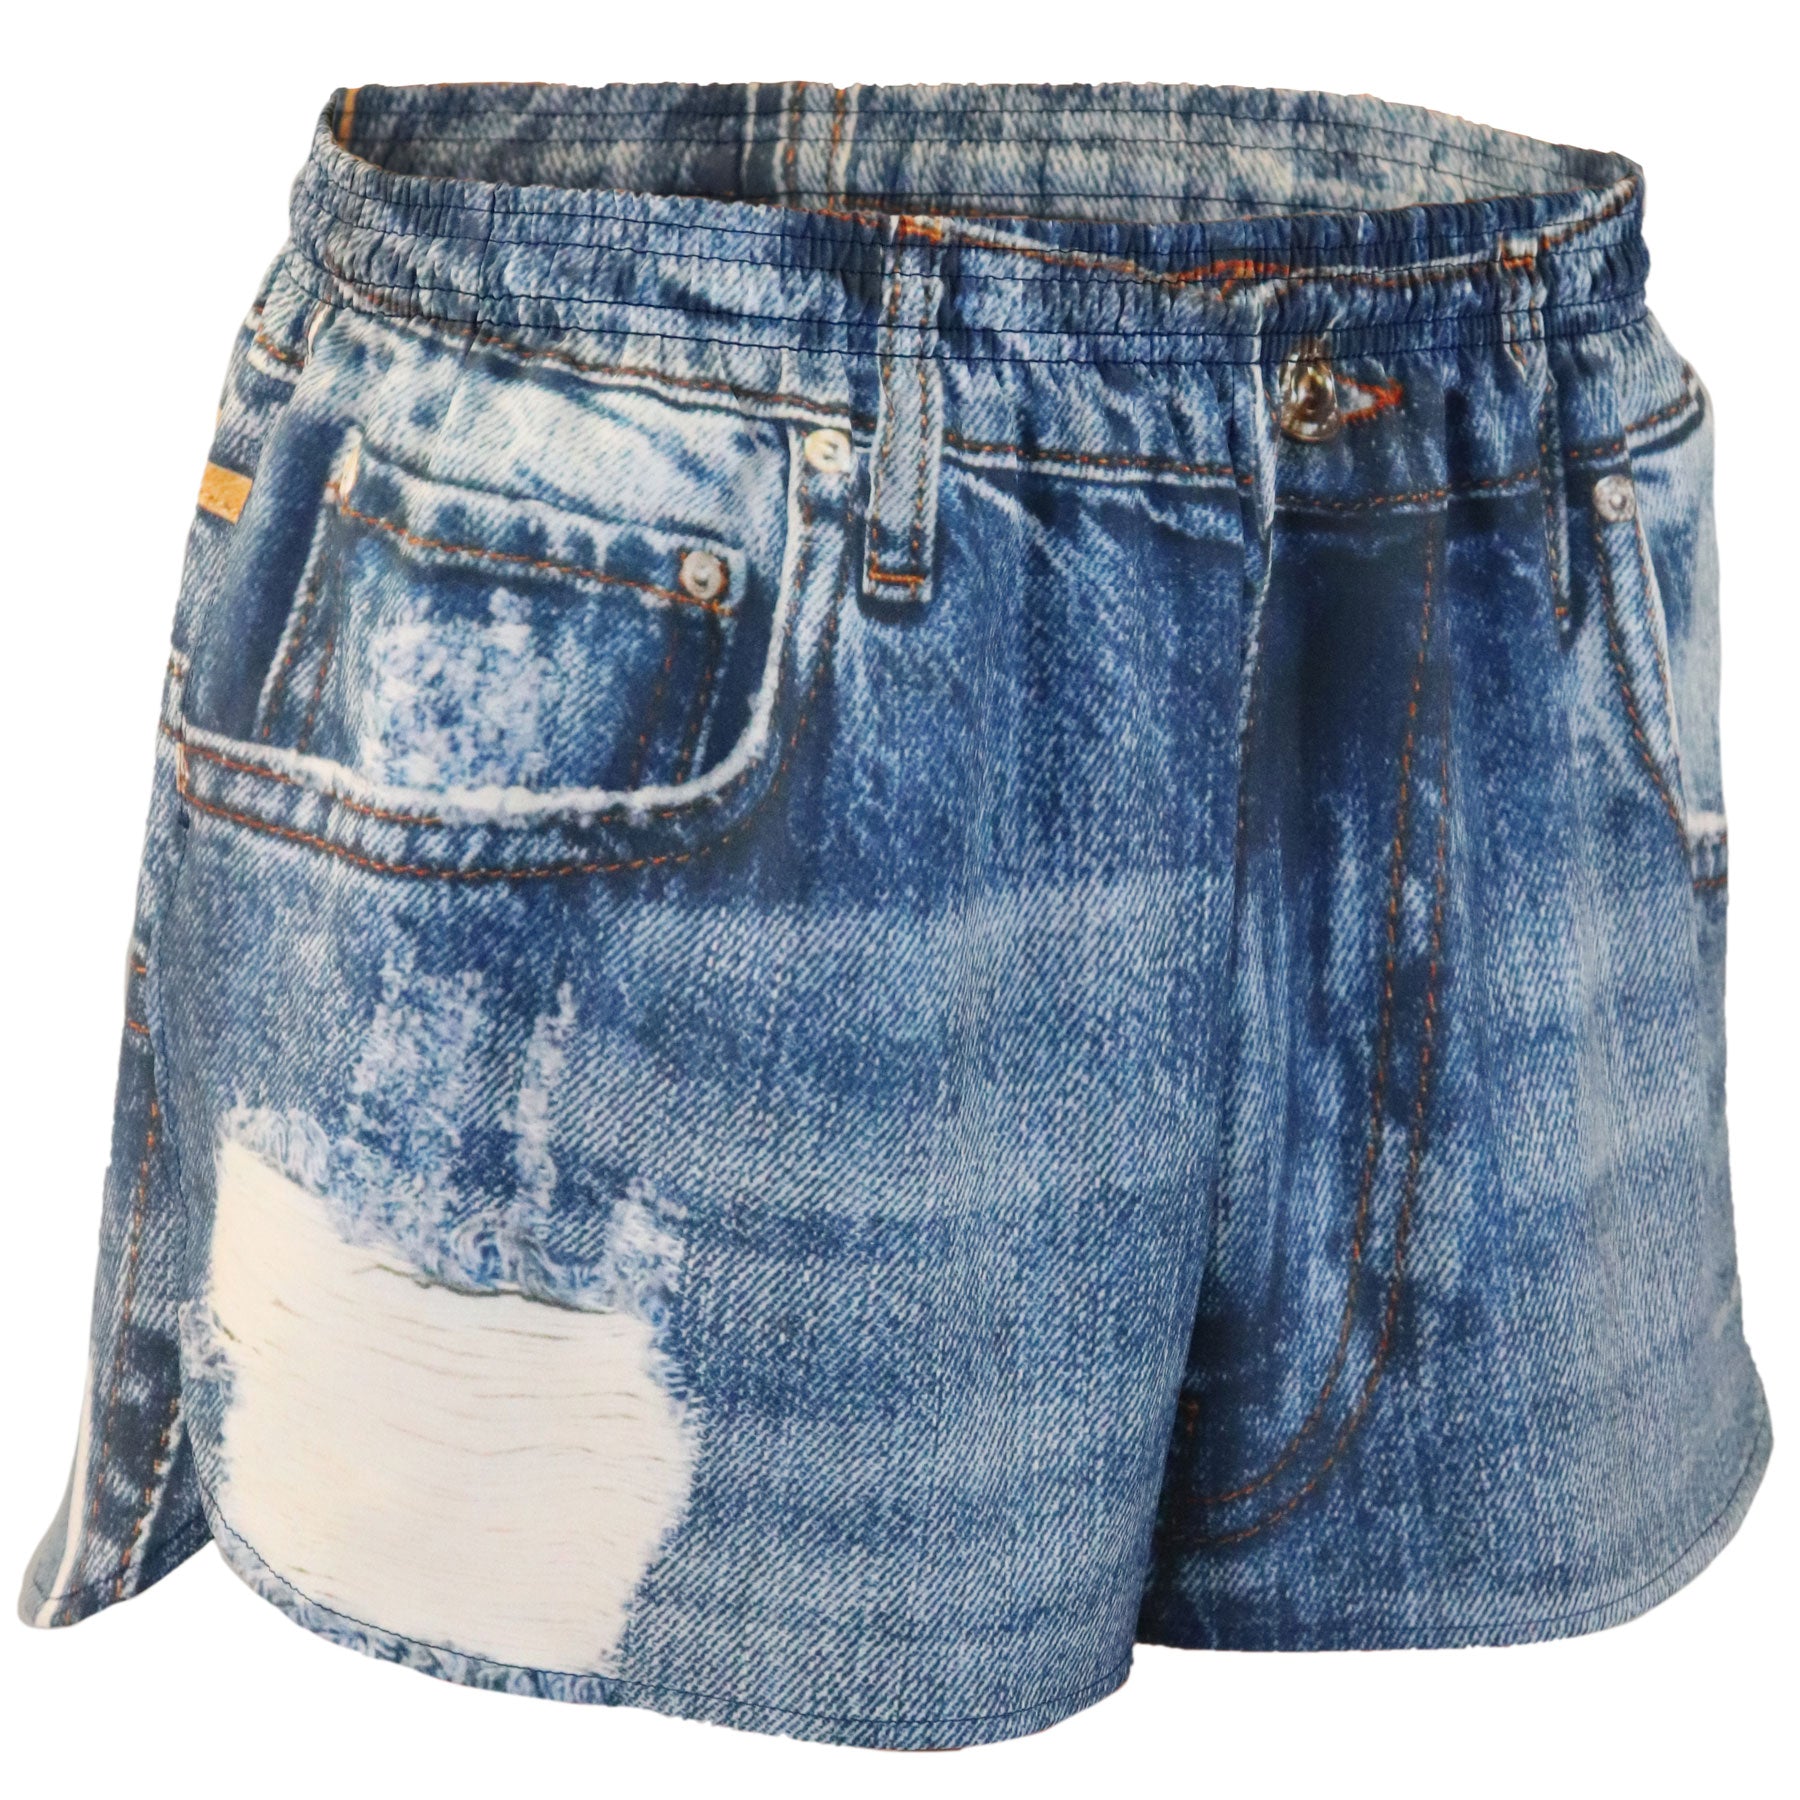 What Do Jorts Do And How Can You Wear Them? - Tech Emf Fashion